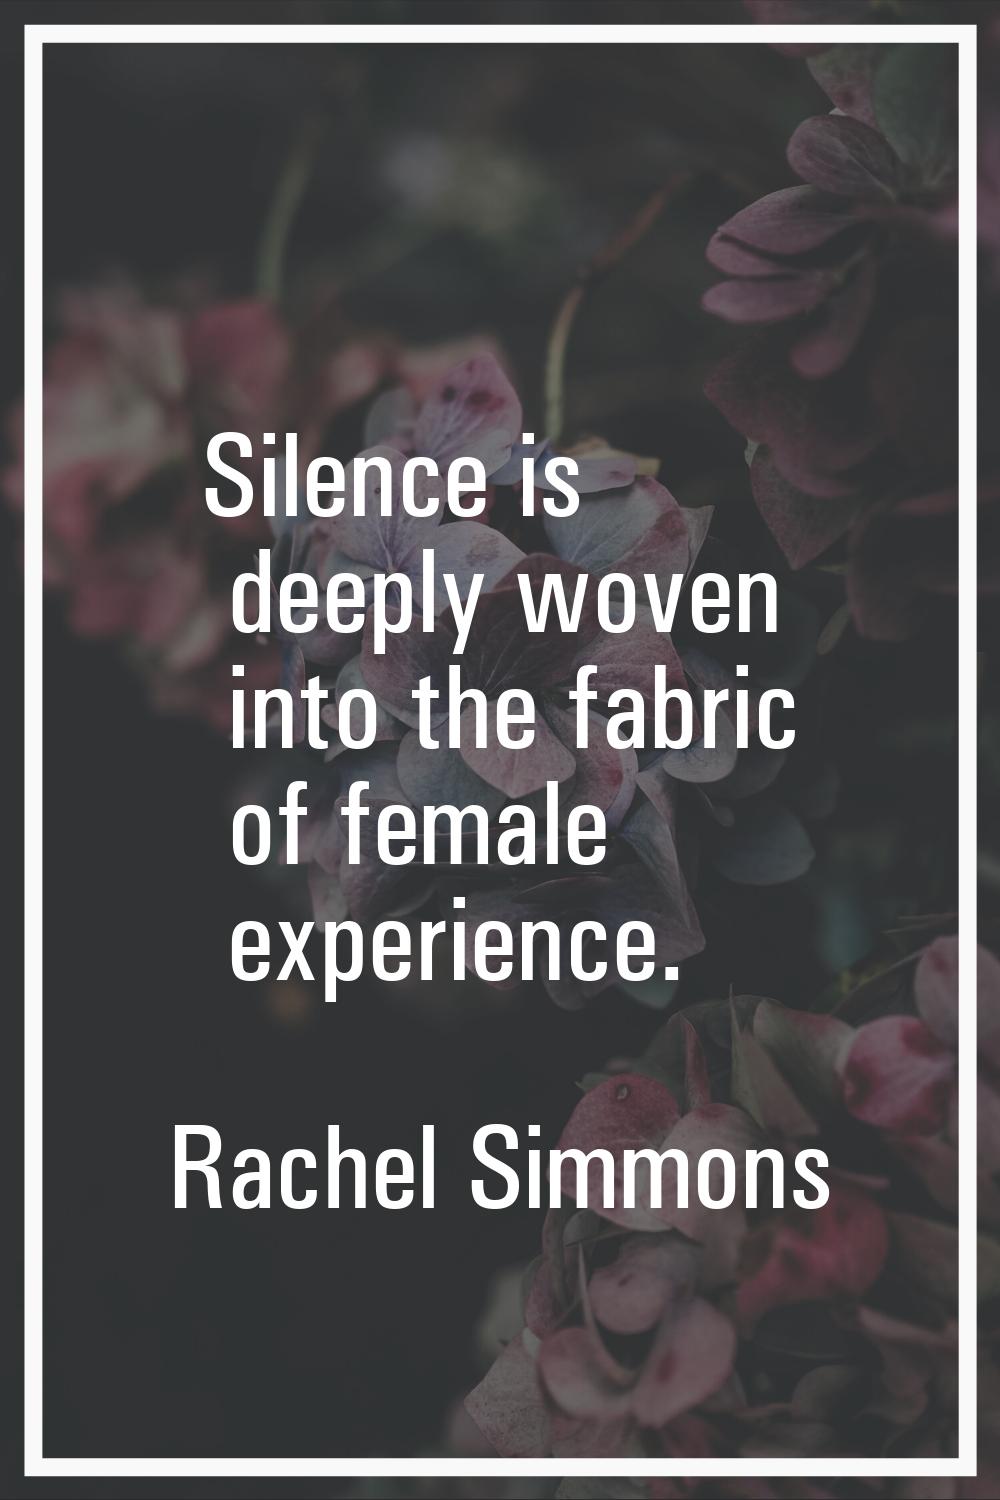 Silence is deeply woven into the fabric of female experience.